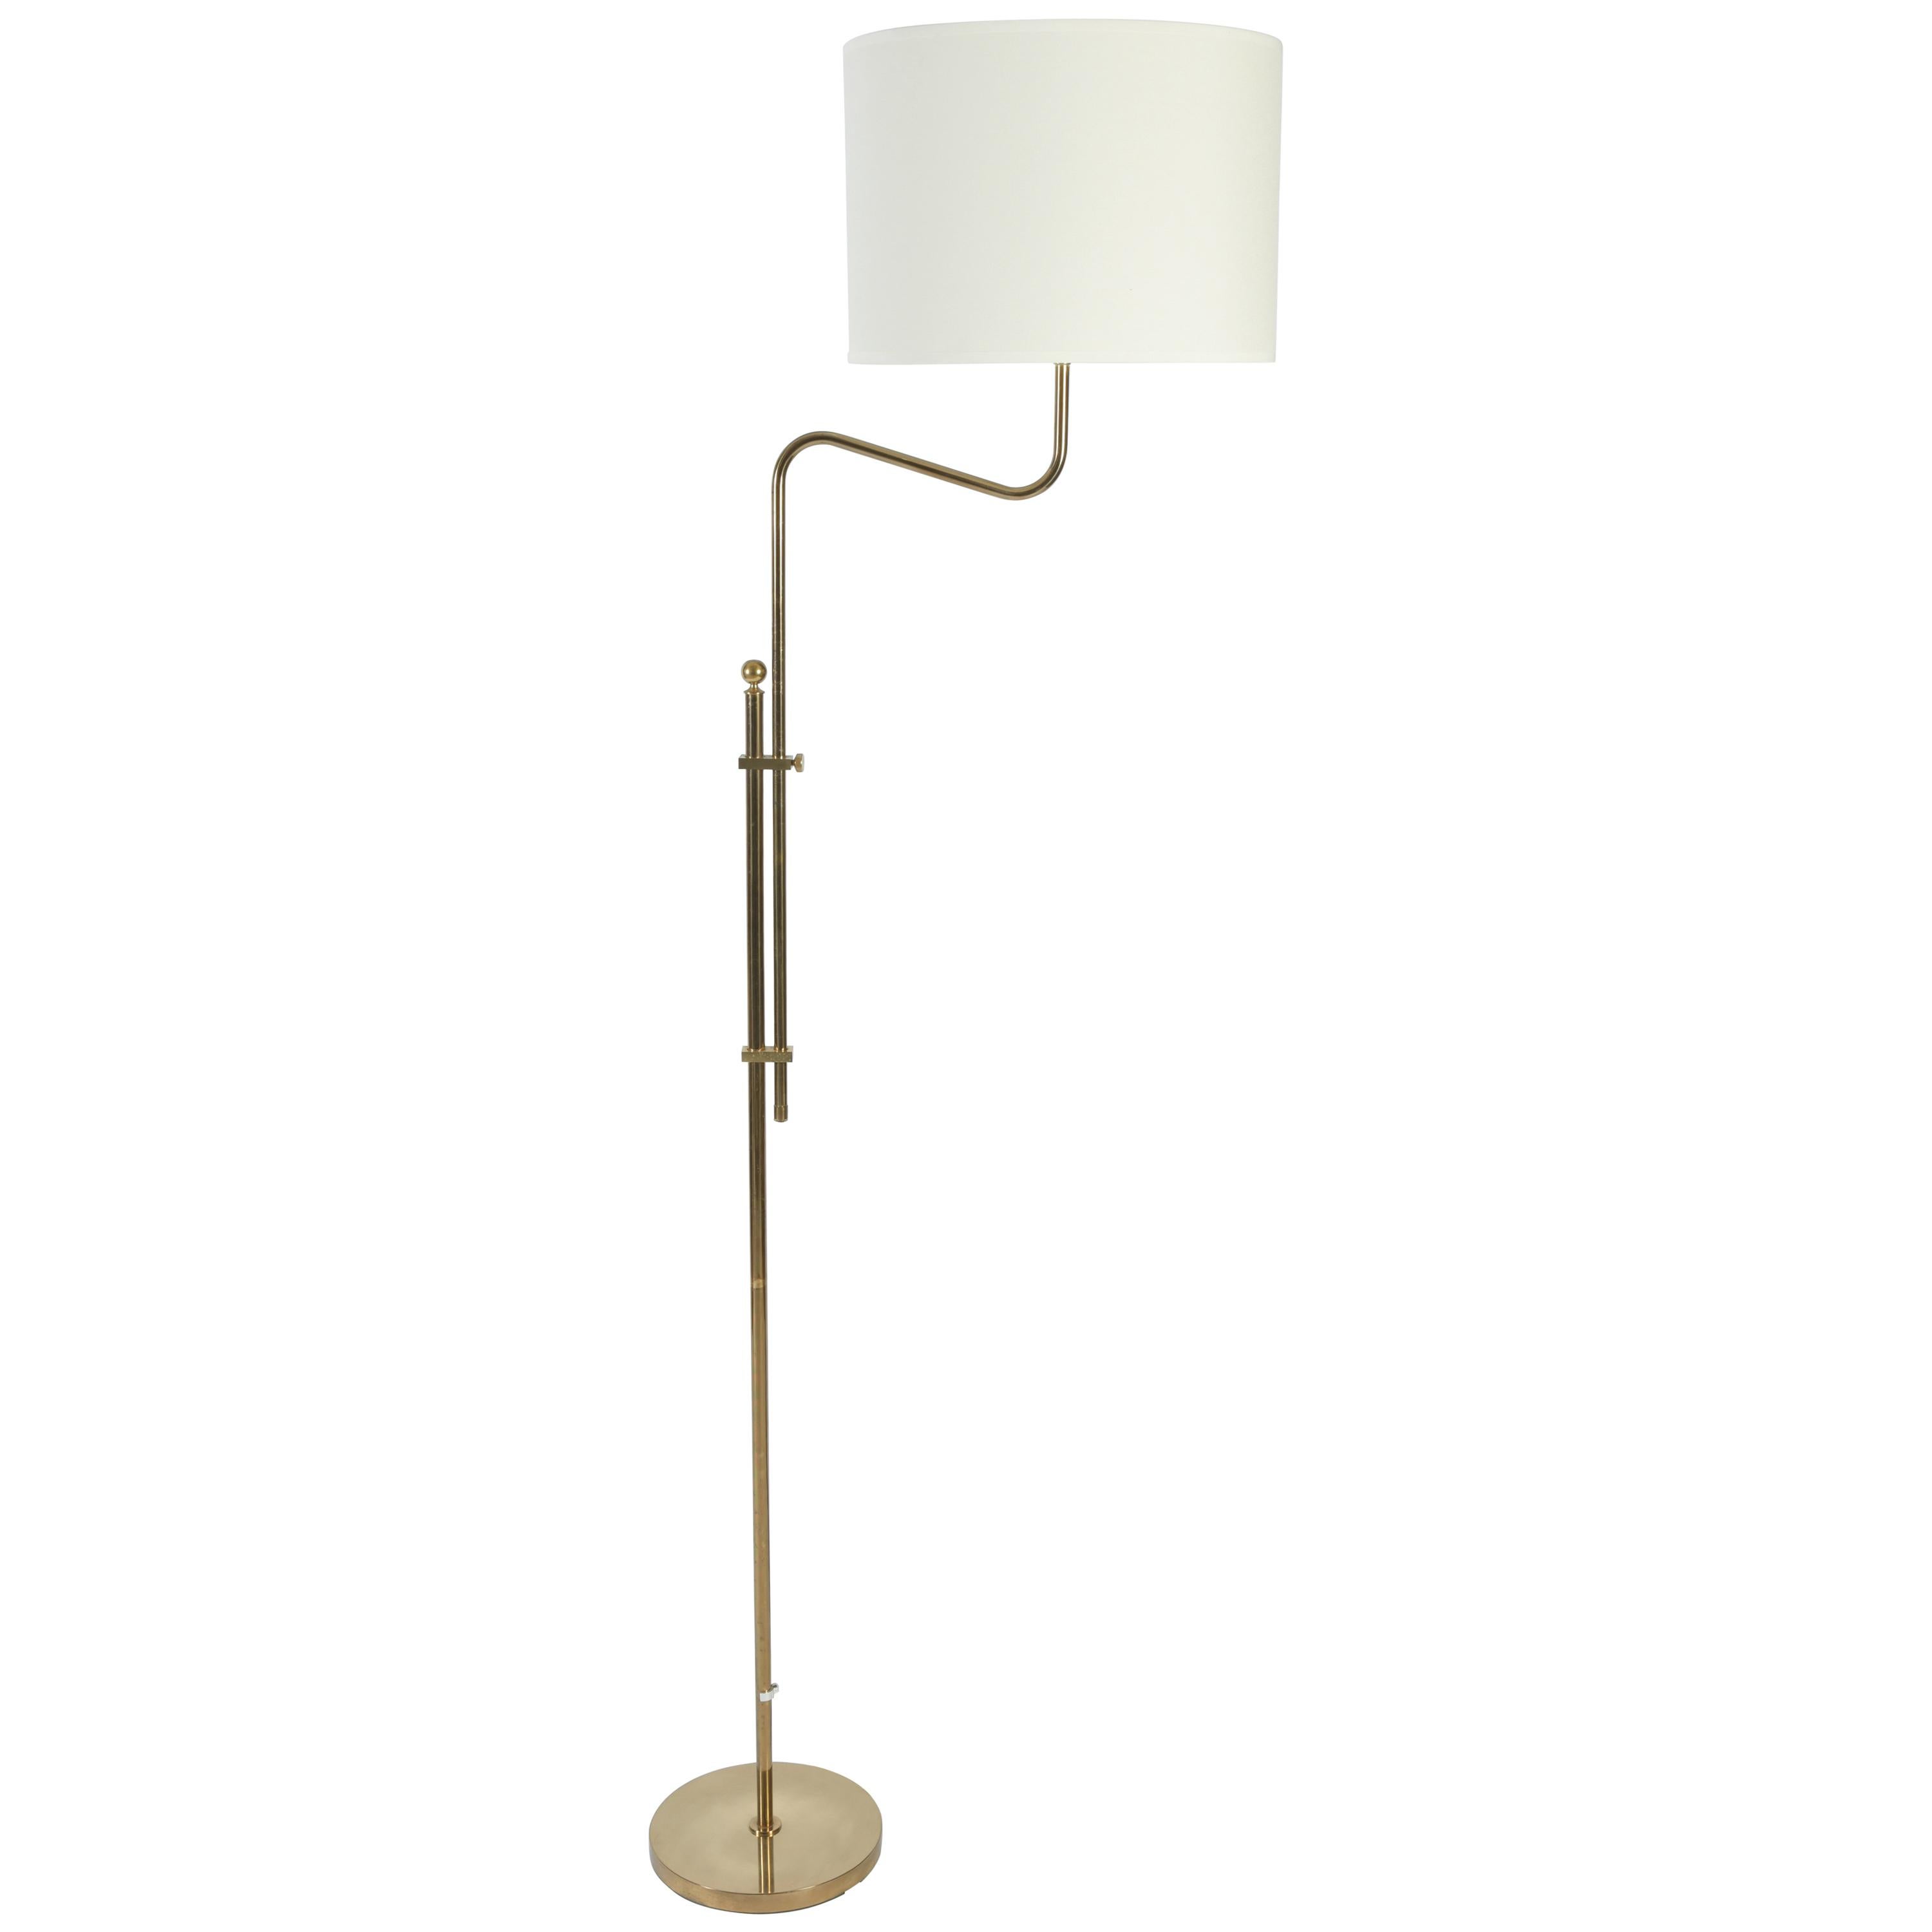 A pair of telescopic brass floor lamp, in the manner of Josef Frank, the adjustable and swiveling 's' shaped arm supporting a bespoke ivory fabric shade
Sweden, third quarter of the 20th century
The overall height varies from 146 cm to 173 cm with